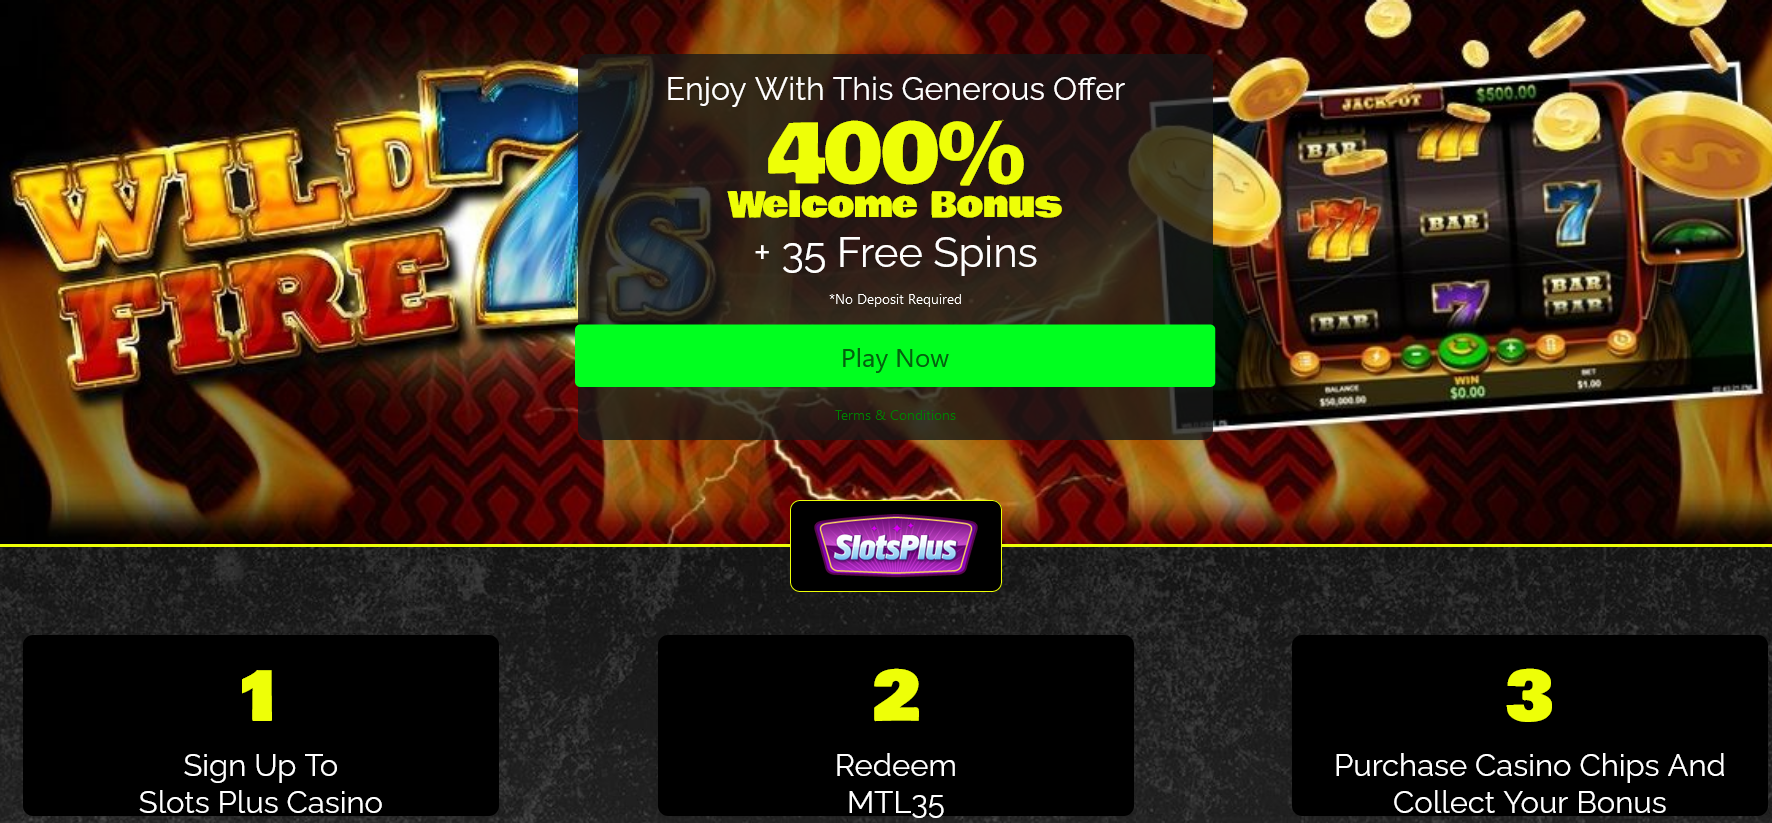 Enjoy with this generous offer 400% Welcome Bonus + 35 Free Spins